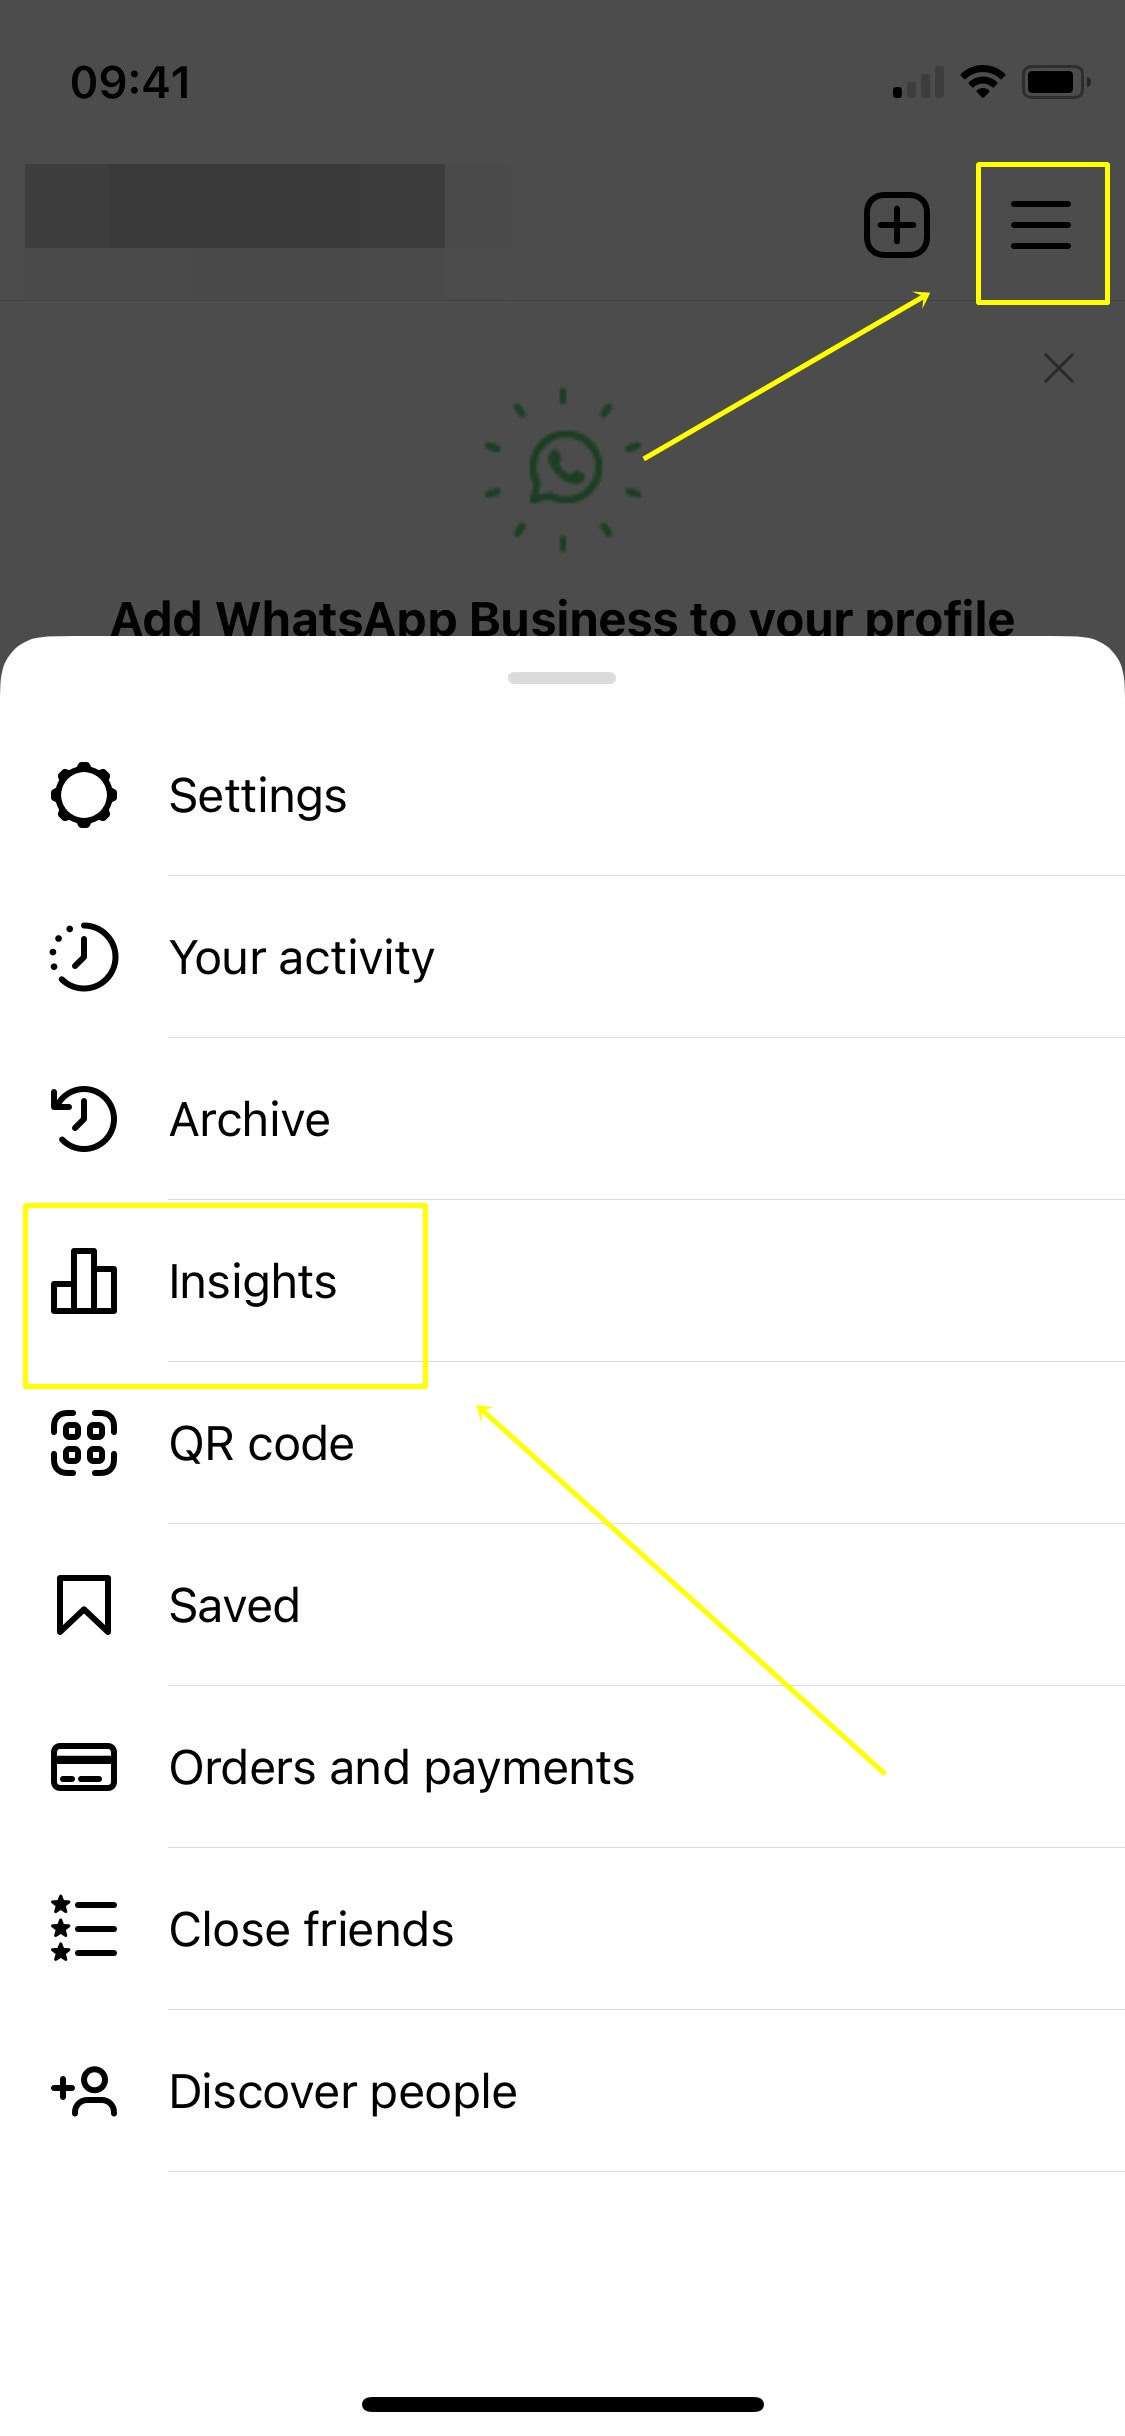 Go to your account settings and tap "Insights."